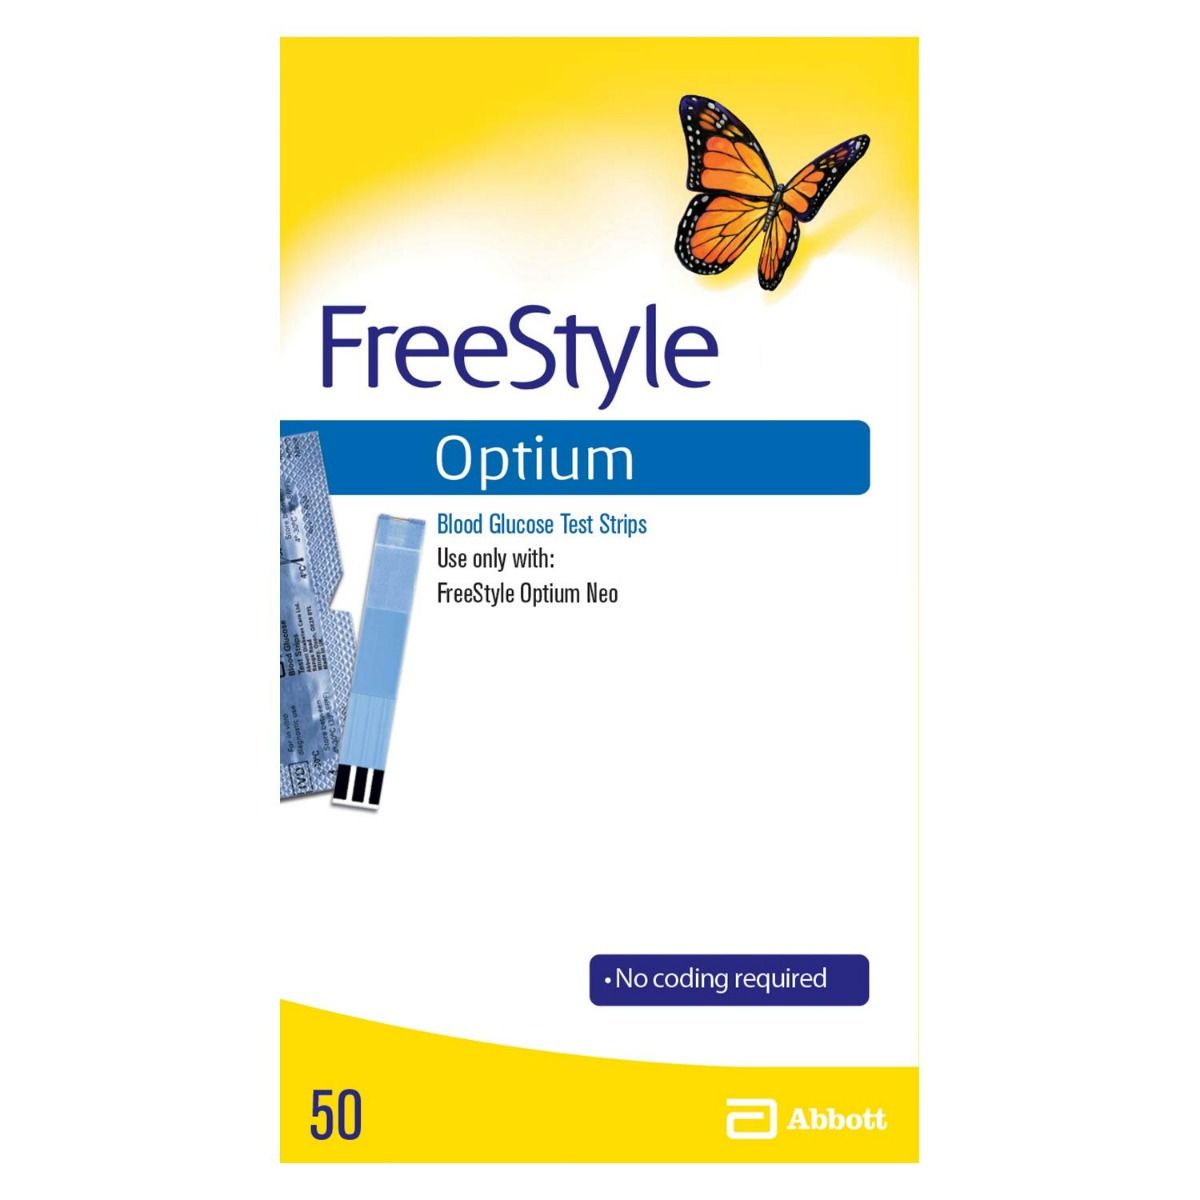 Freestyle Optium Blood Glucose Test Strips, 50 Count, Pack of 1 